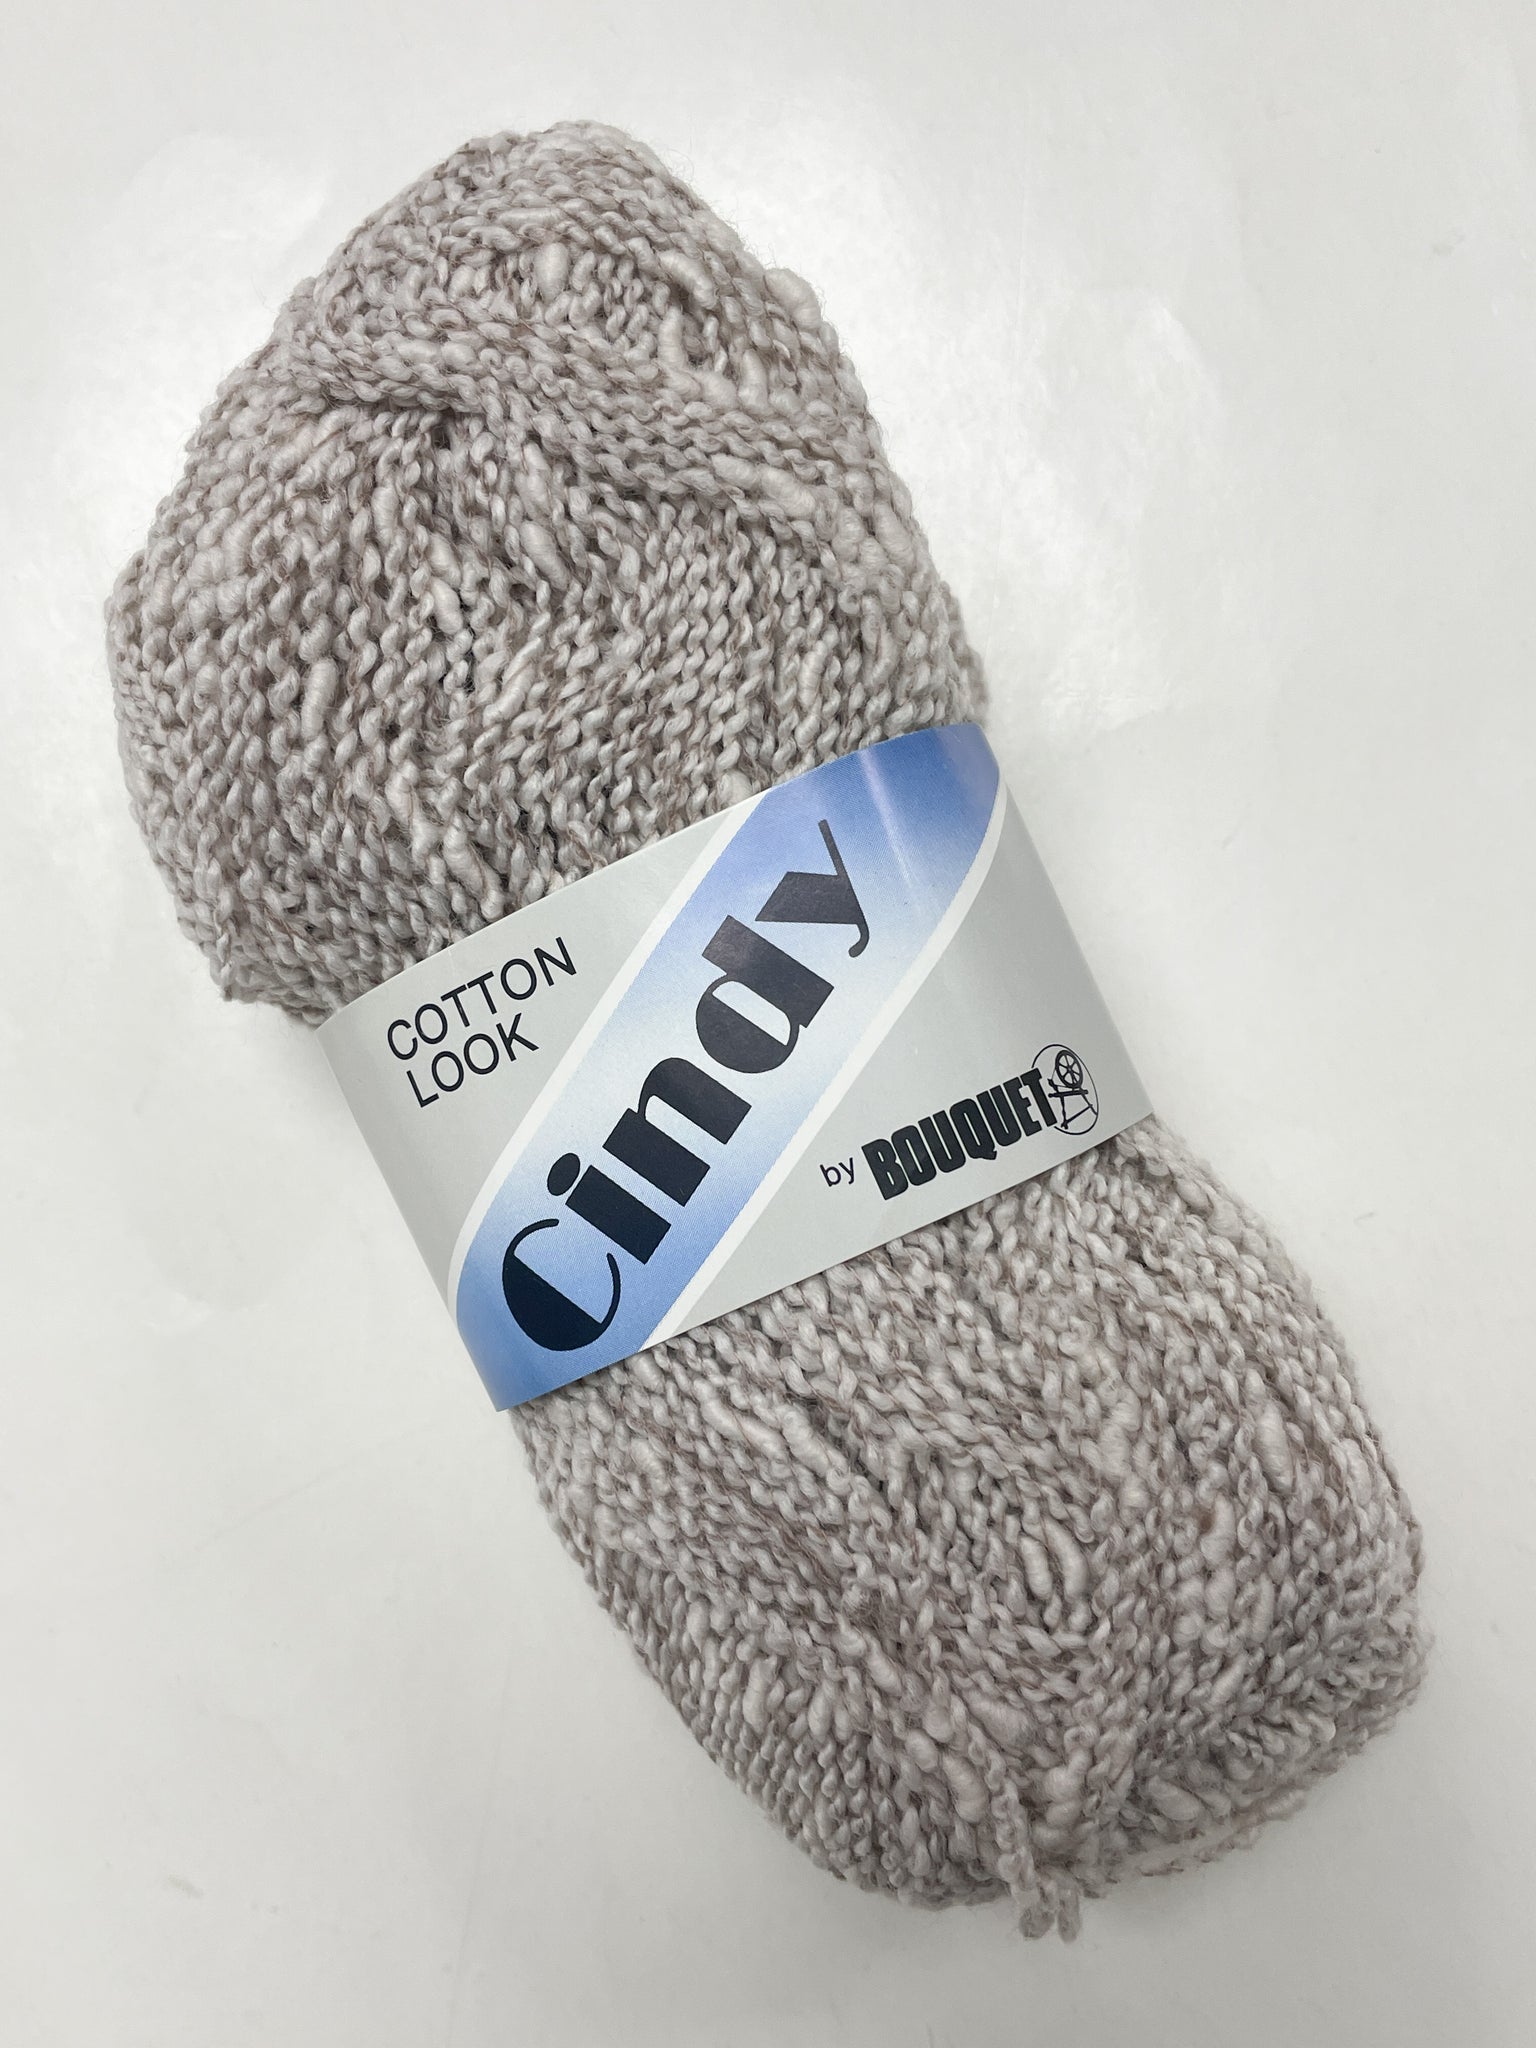 Yarn Acrylic/Wool Blend - Taupe and Off White